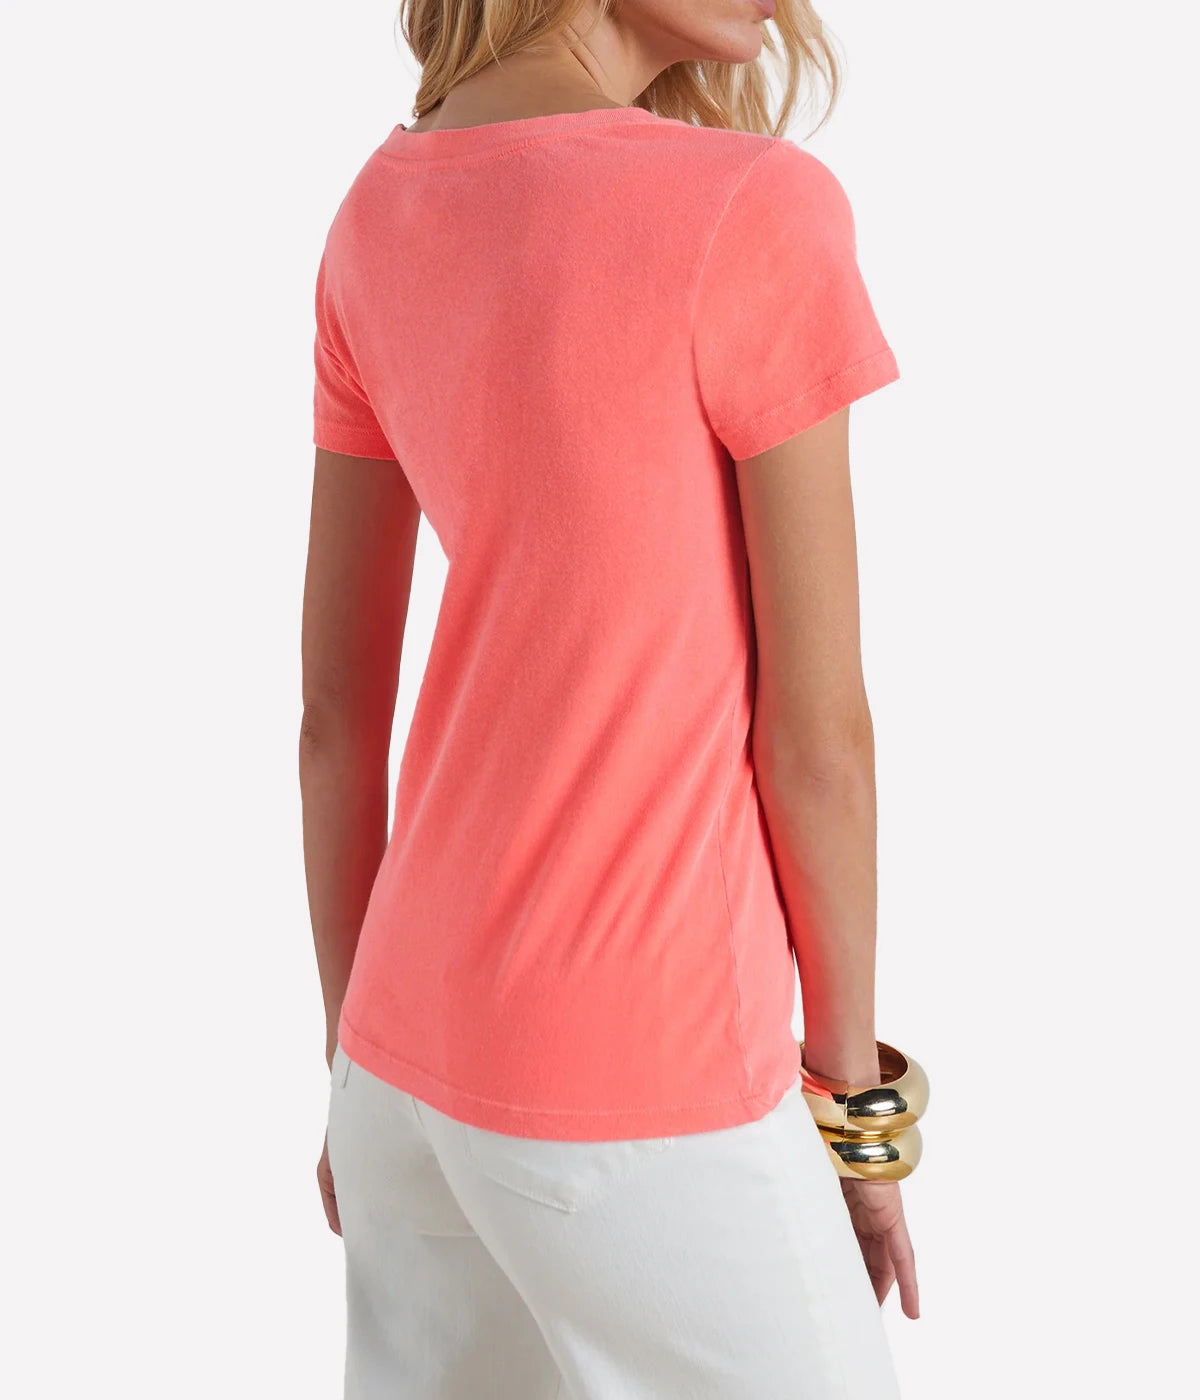 L'AGENCE - Cory Cotton Scoopneck Tee in Neon Coral